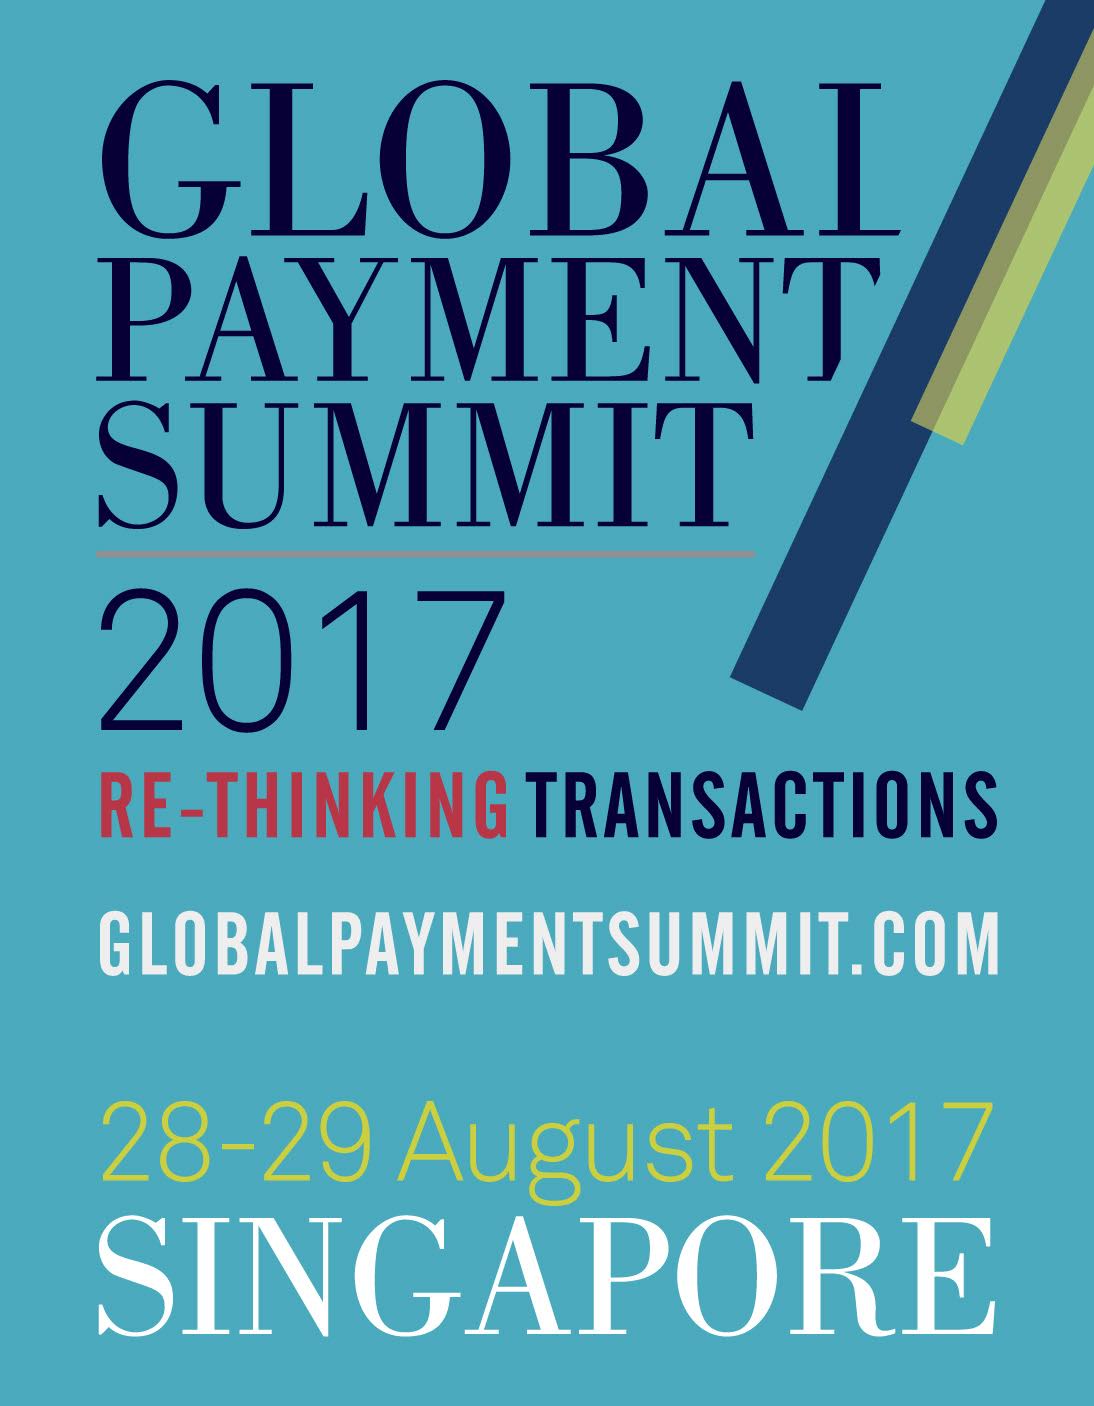 Global Payment Summit | 28-29 August 2017
Join the best ranked briefing on global & APAC payments / transaction developments in Singapore!

GlobalPaymentSummit is a strategic & pragmatic - for & by senior professionals - platform. GPS covers key trends in the payments and the transaction space.  By exchanging the key trends, best practices and workable solutions, we deep-dive into topics and innovations affecting the business directions for the future.

For more information, please contact:
email: info@transactives.com
website: www.globalpaymentsummit.com
